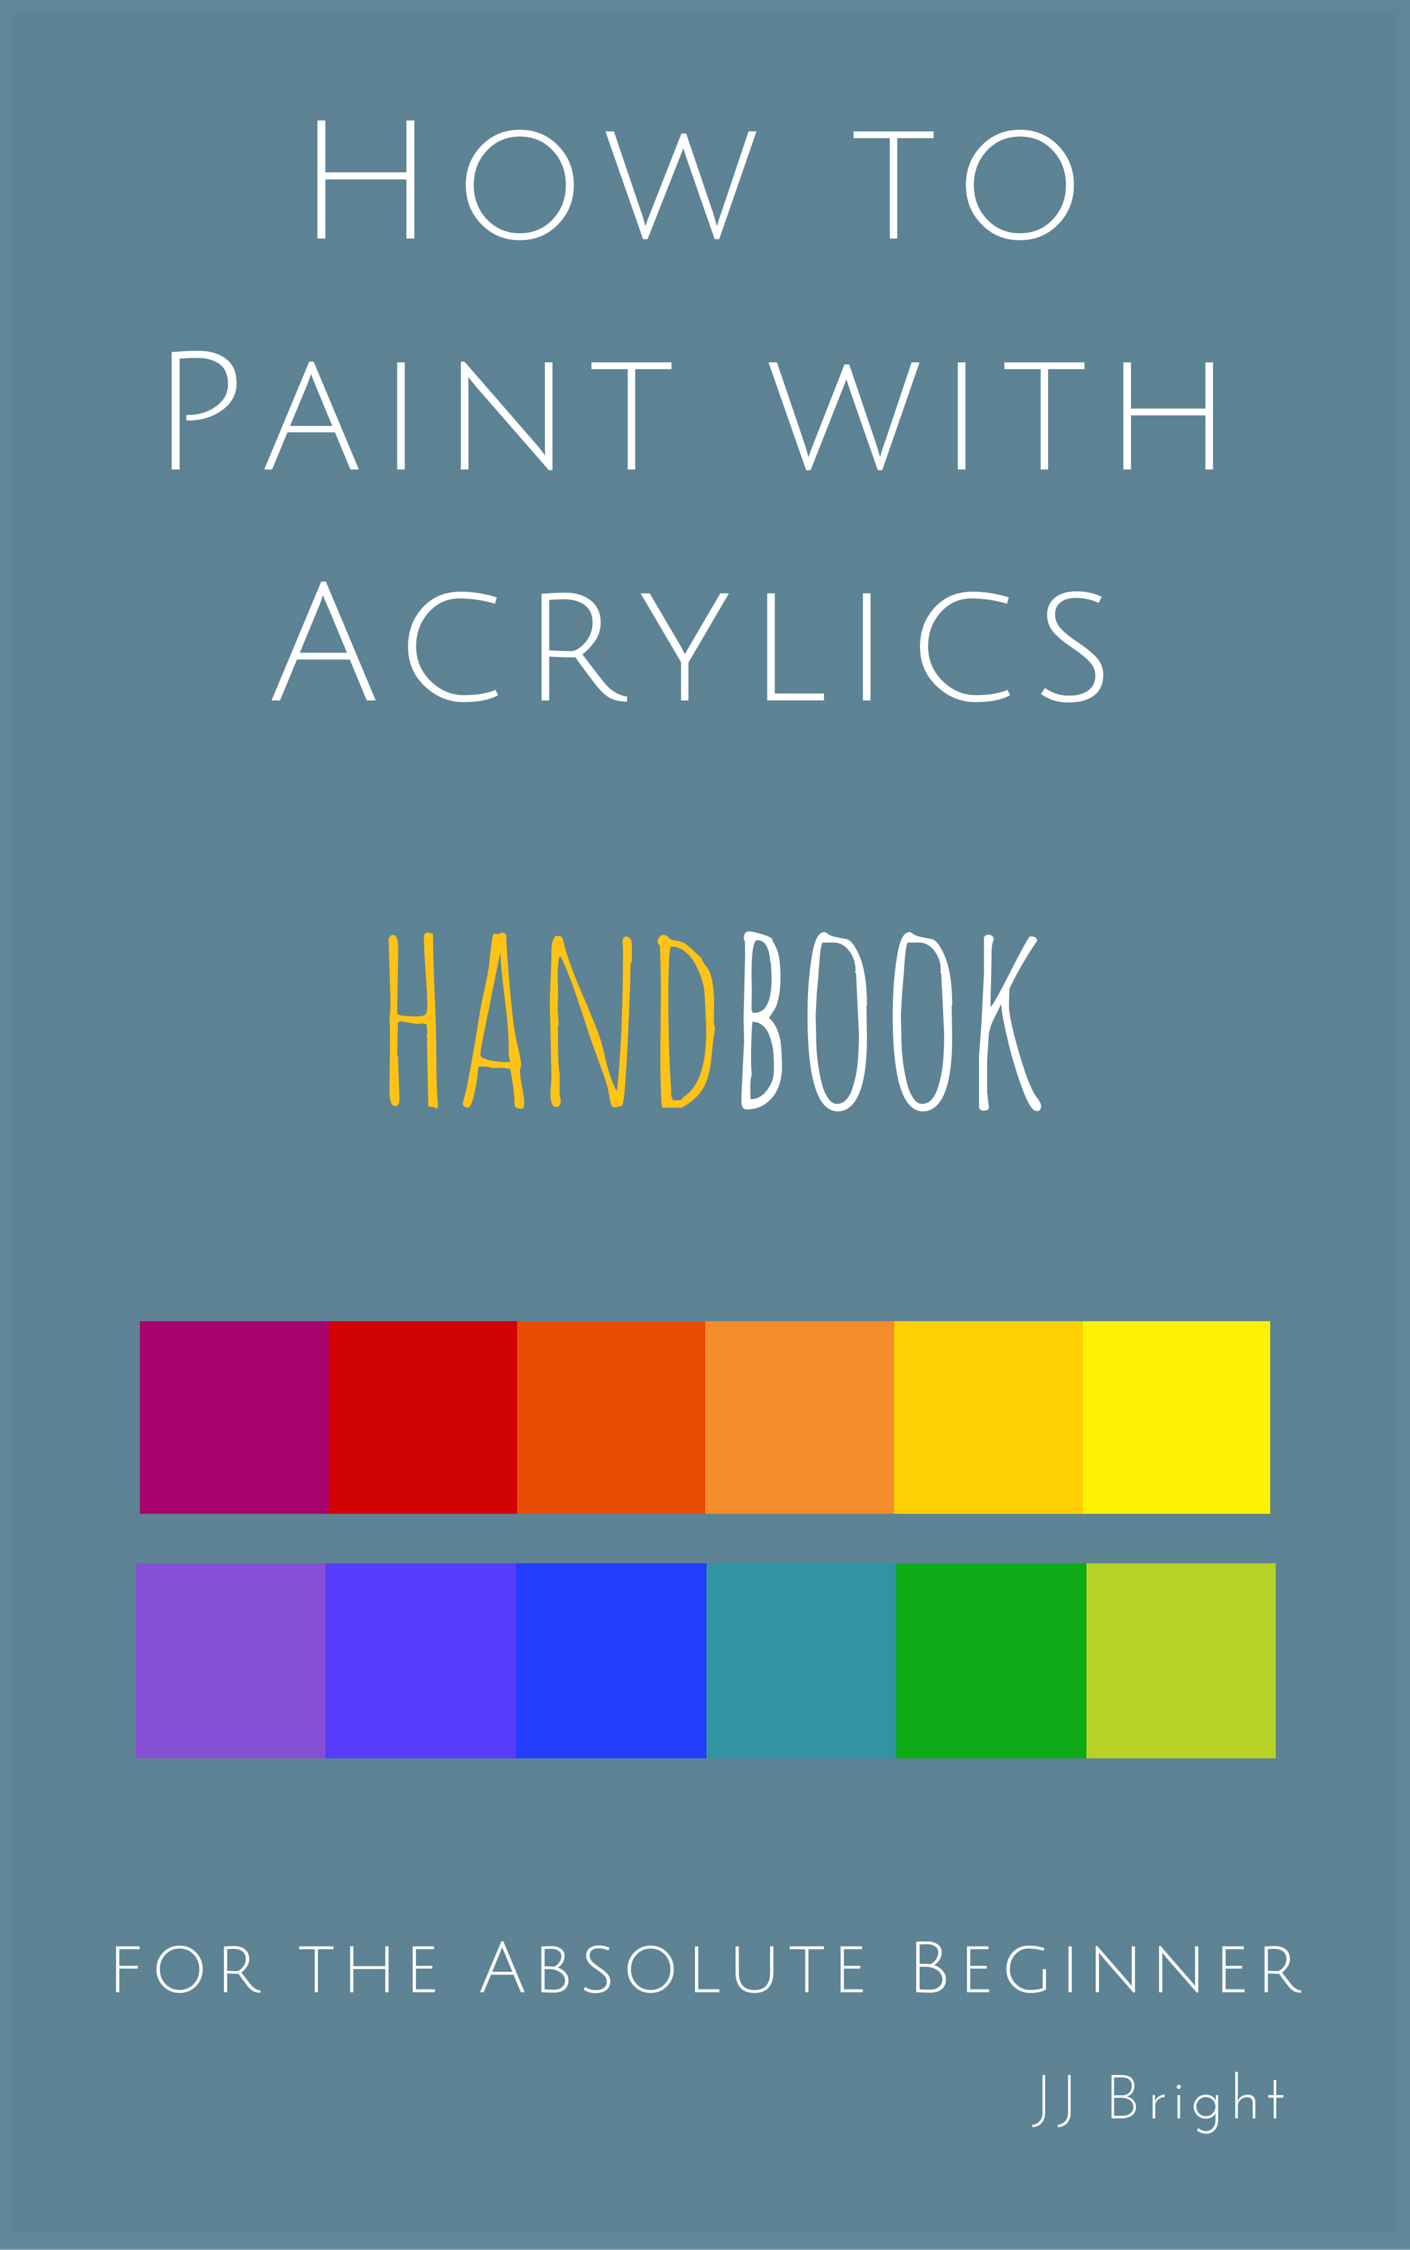 Handbook now on iTunes how to paint with acrylics handbook for the absolute beginner